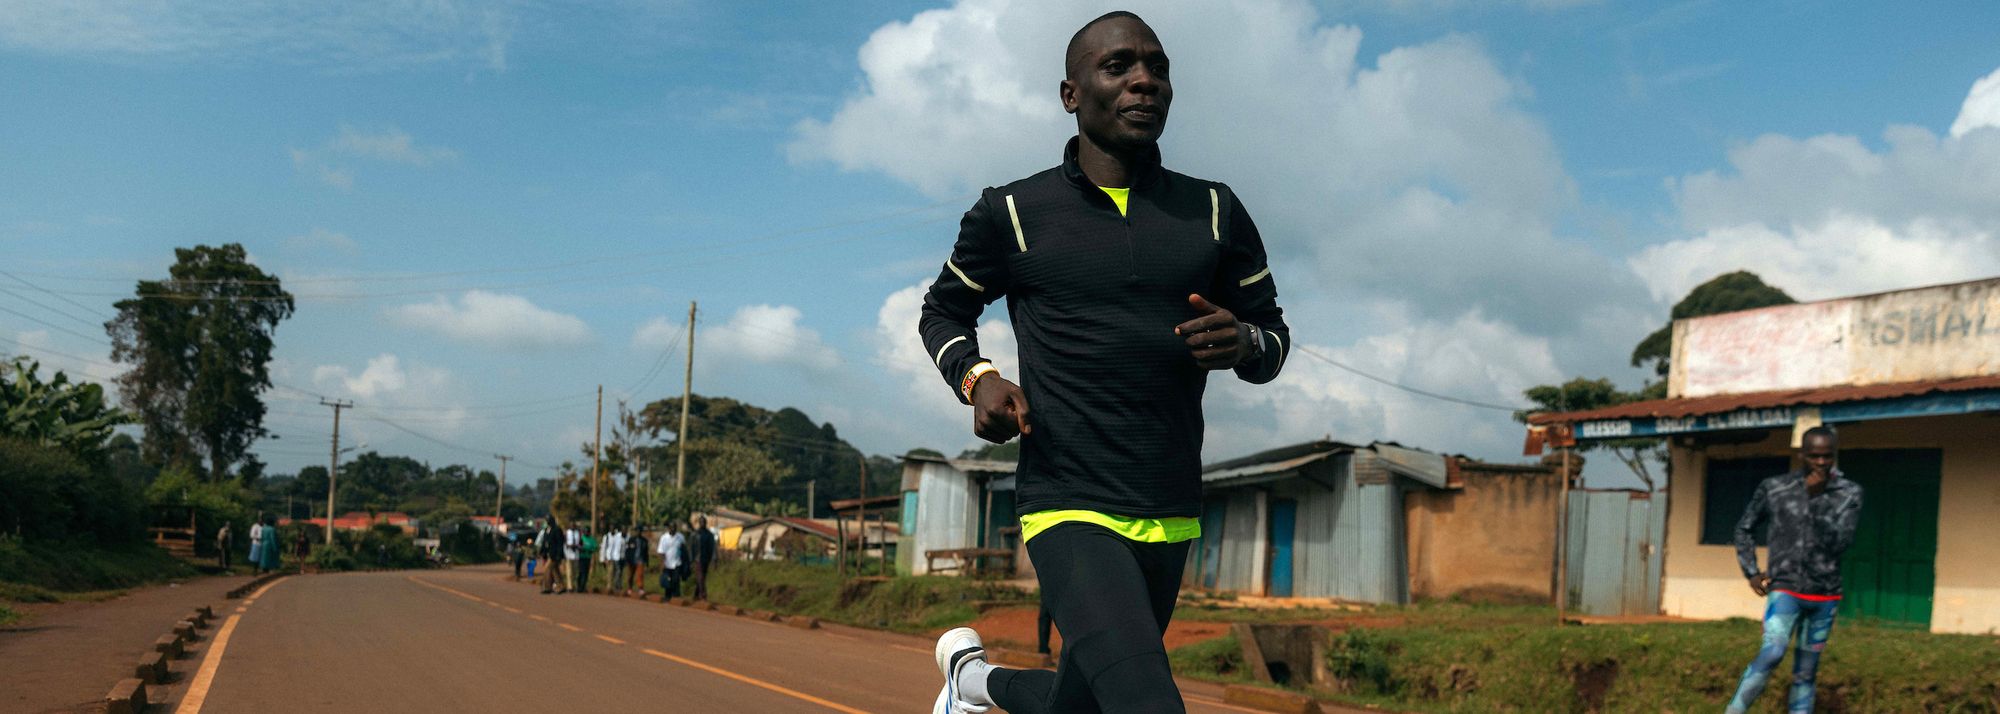 Welcoming World Athletics Inside Track to his home country, Wanyonyi reflects on his breakthrough 2023 season and shares his Olympic ambitions